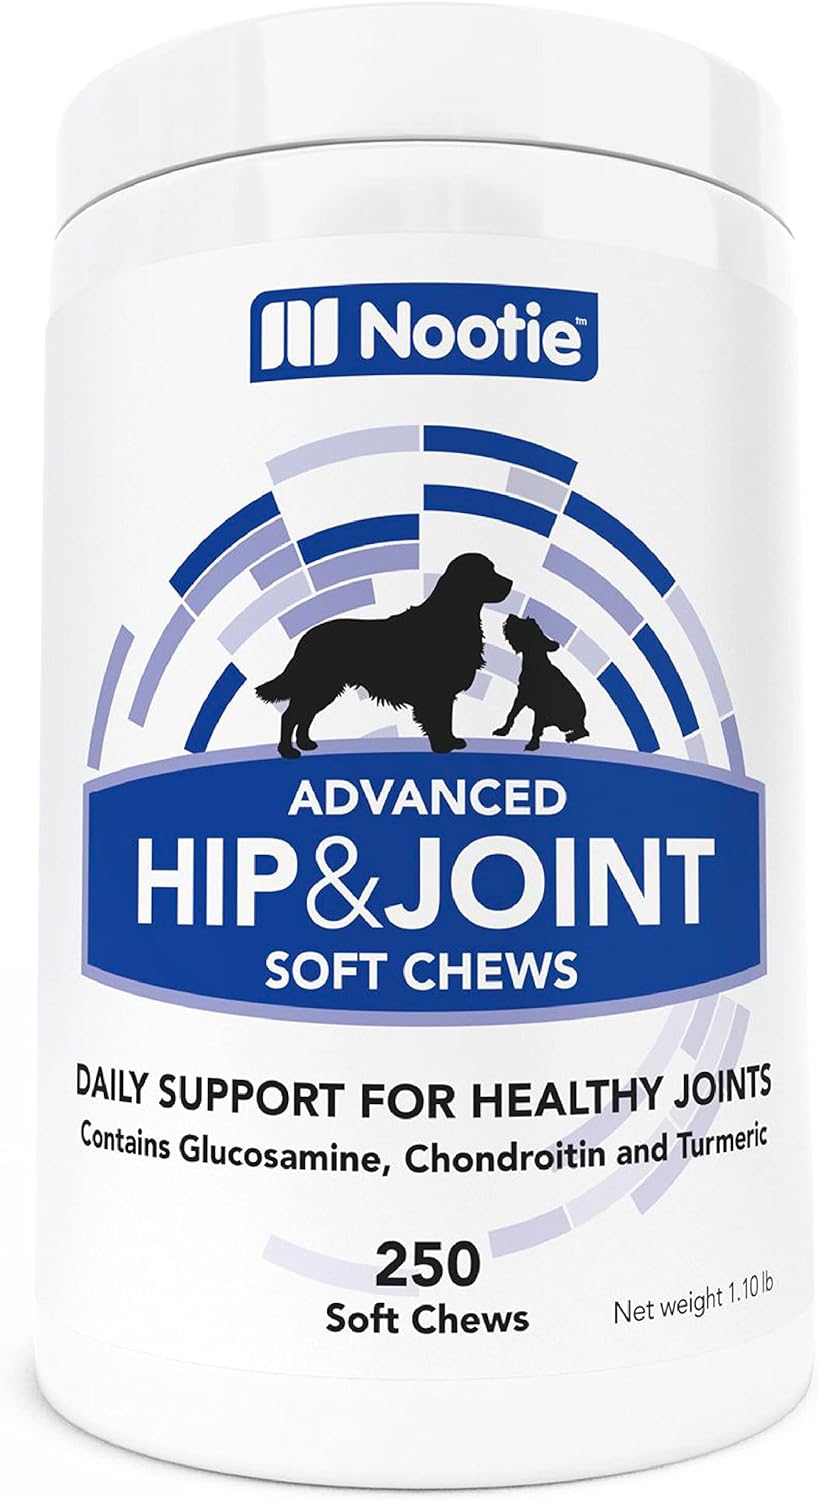 Nootie Glucosamine for Dogs - 250 ct - Hip and Joint Soft Chews Supplement for Dogs - Daily Dog MSM Chondroitin Chews with Turmeric - Joint Care Vitamins for All Breeds and Sizes USA